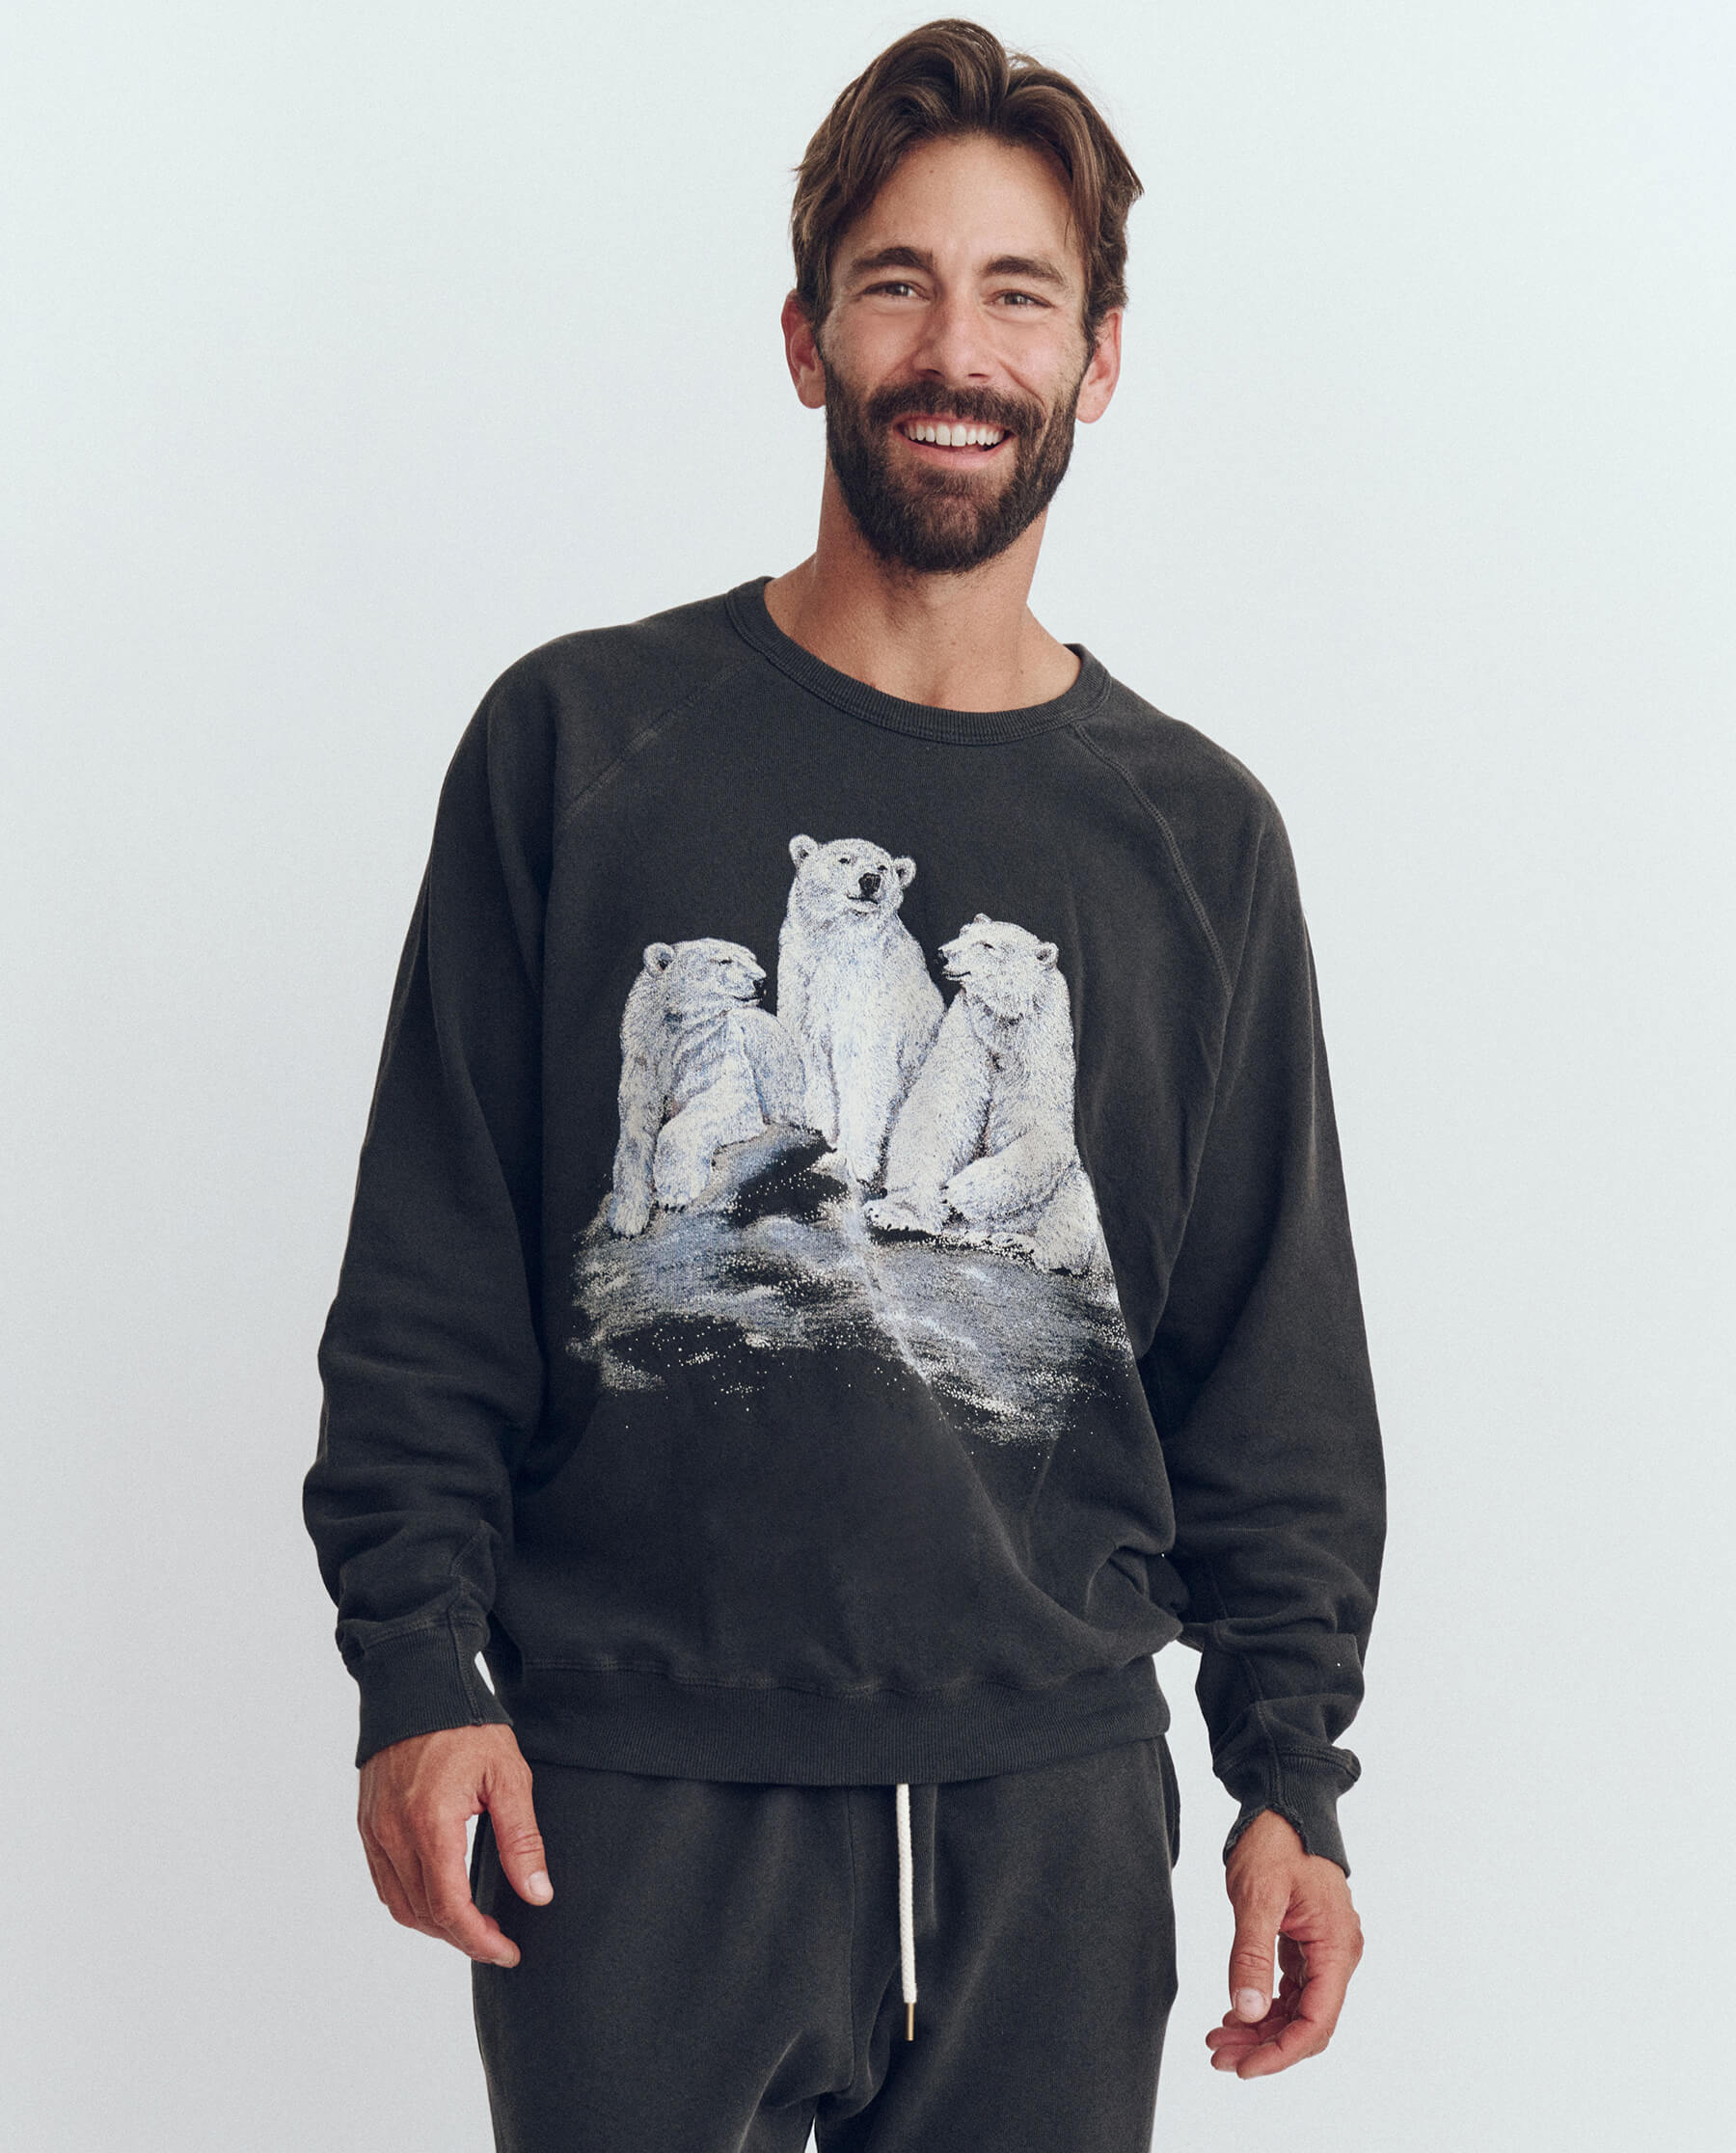 The Men's College Sweatshirt. Graphic -- Washed Black with Polar Bear Graphic SWEATSHIRTS THE GREAT. HOL 23 D1 MEN